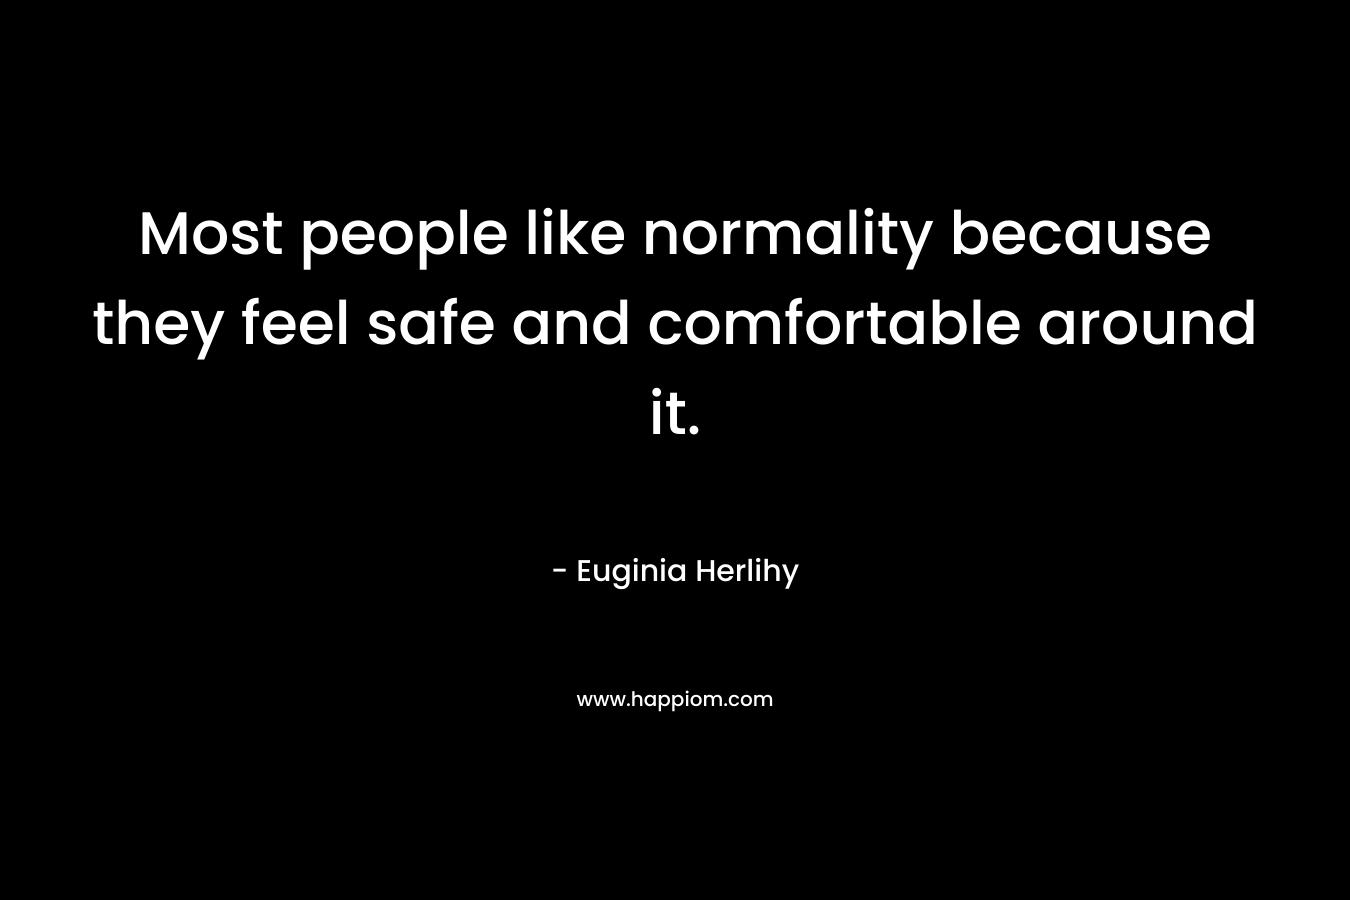 Most people like normality because they feel safe and comfortable around it.